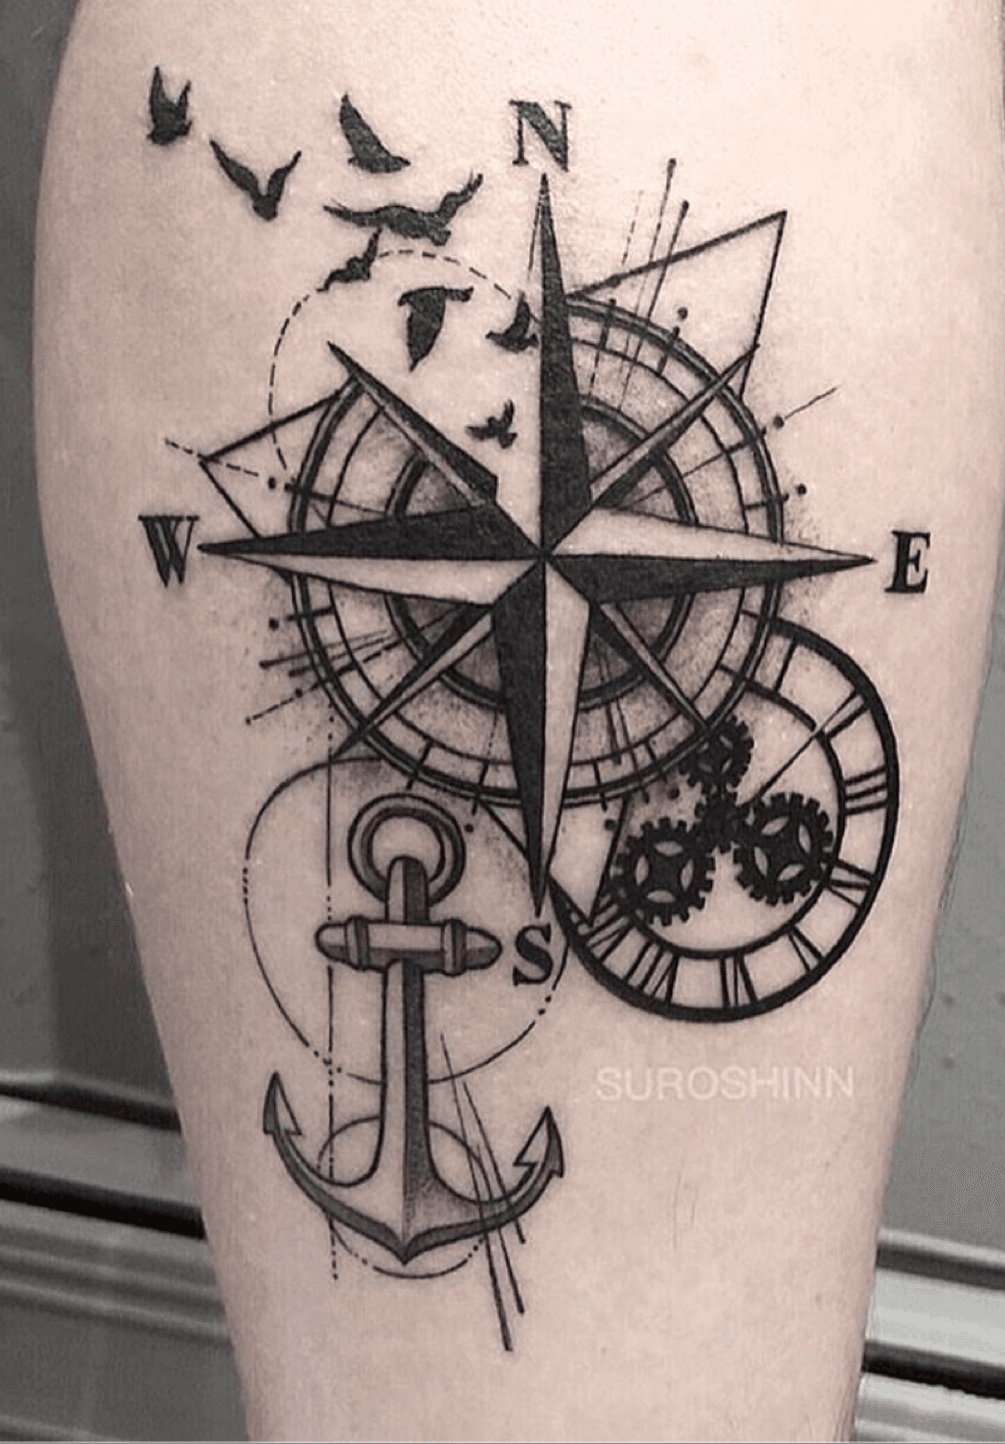 Tattoo designs inspired by time Are you letting time slip by or are y   TikTok